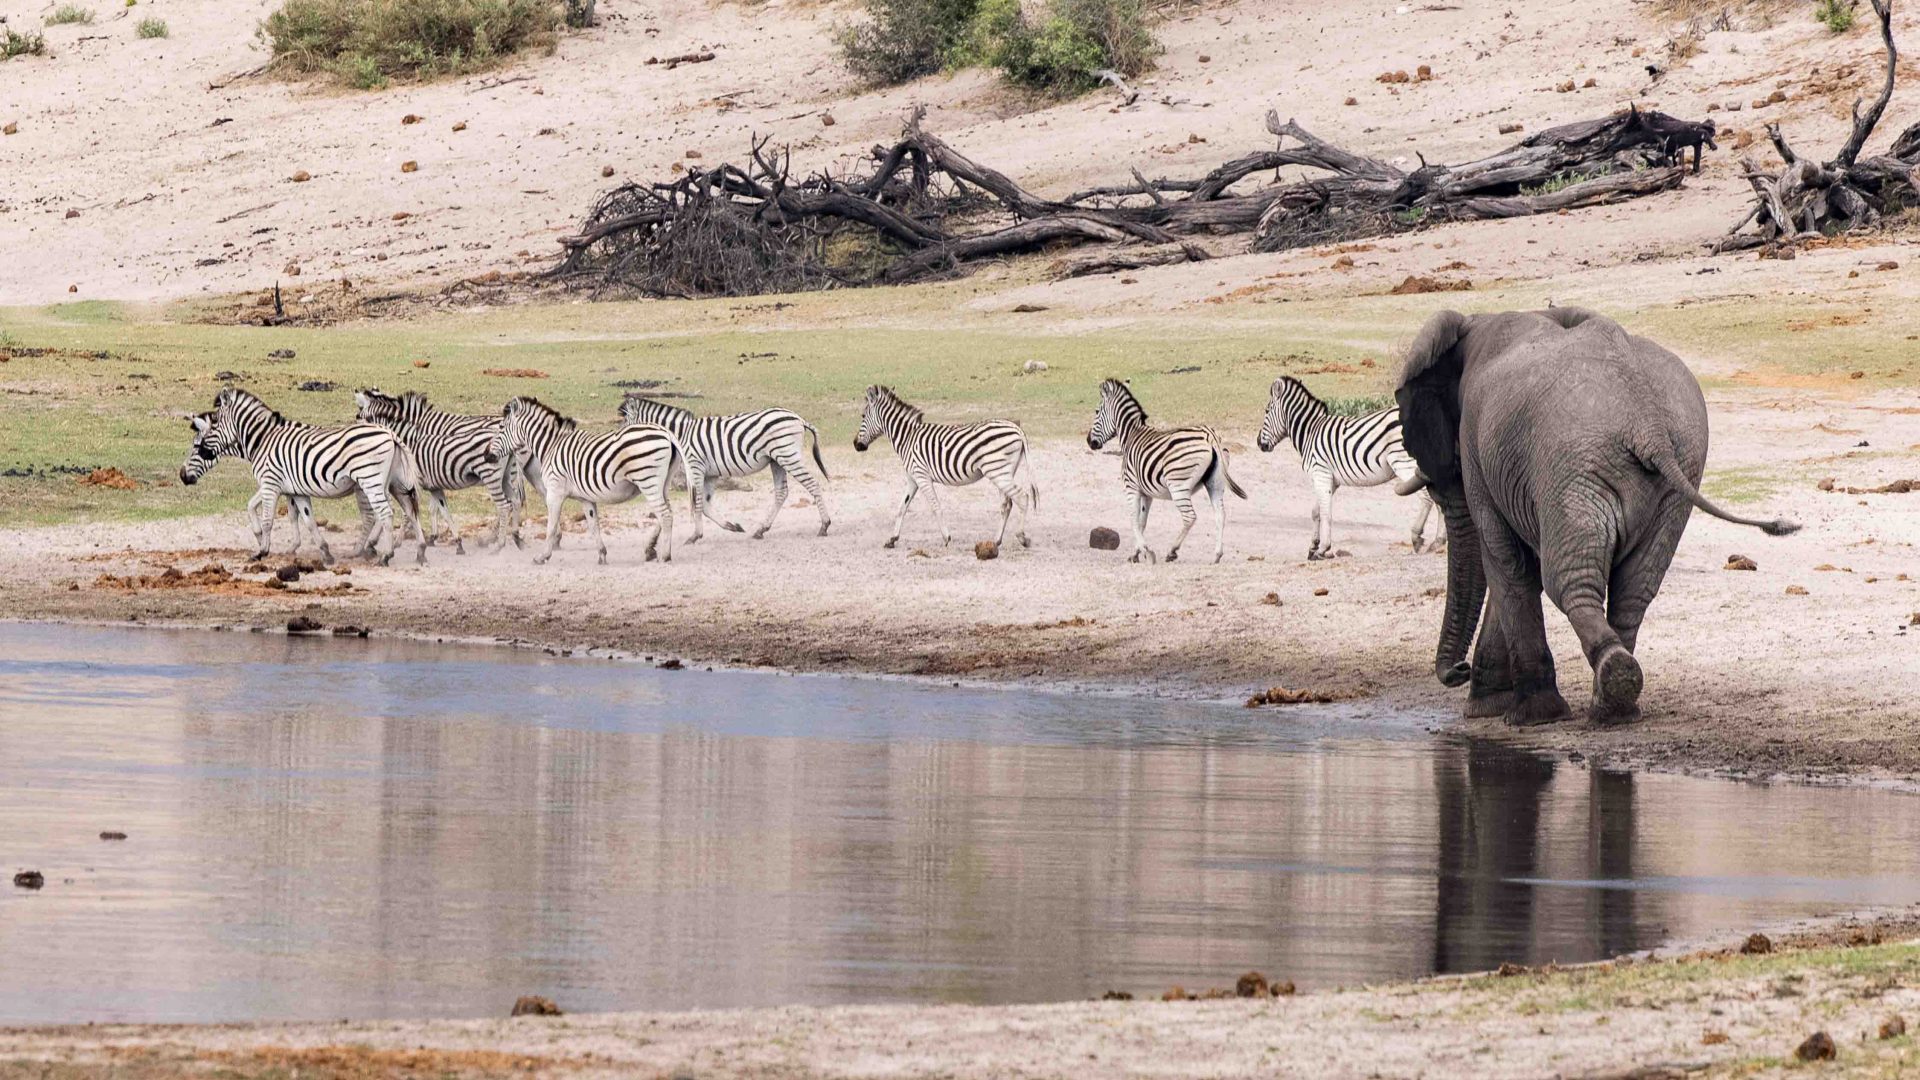 An elephant and zebras at a water hole.